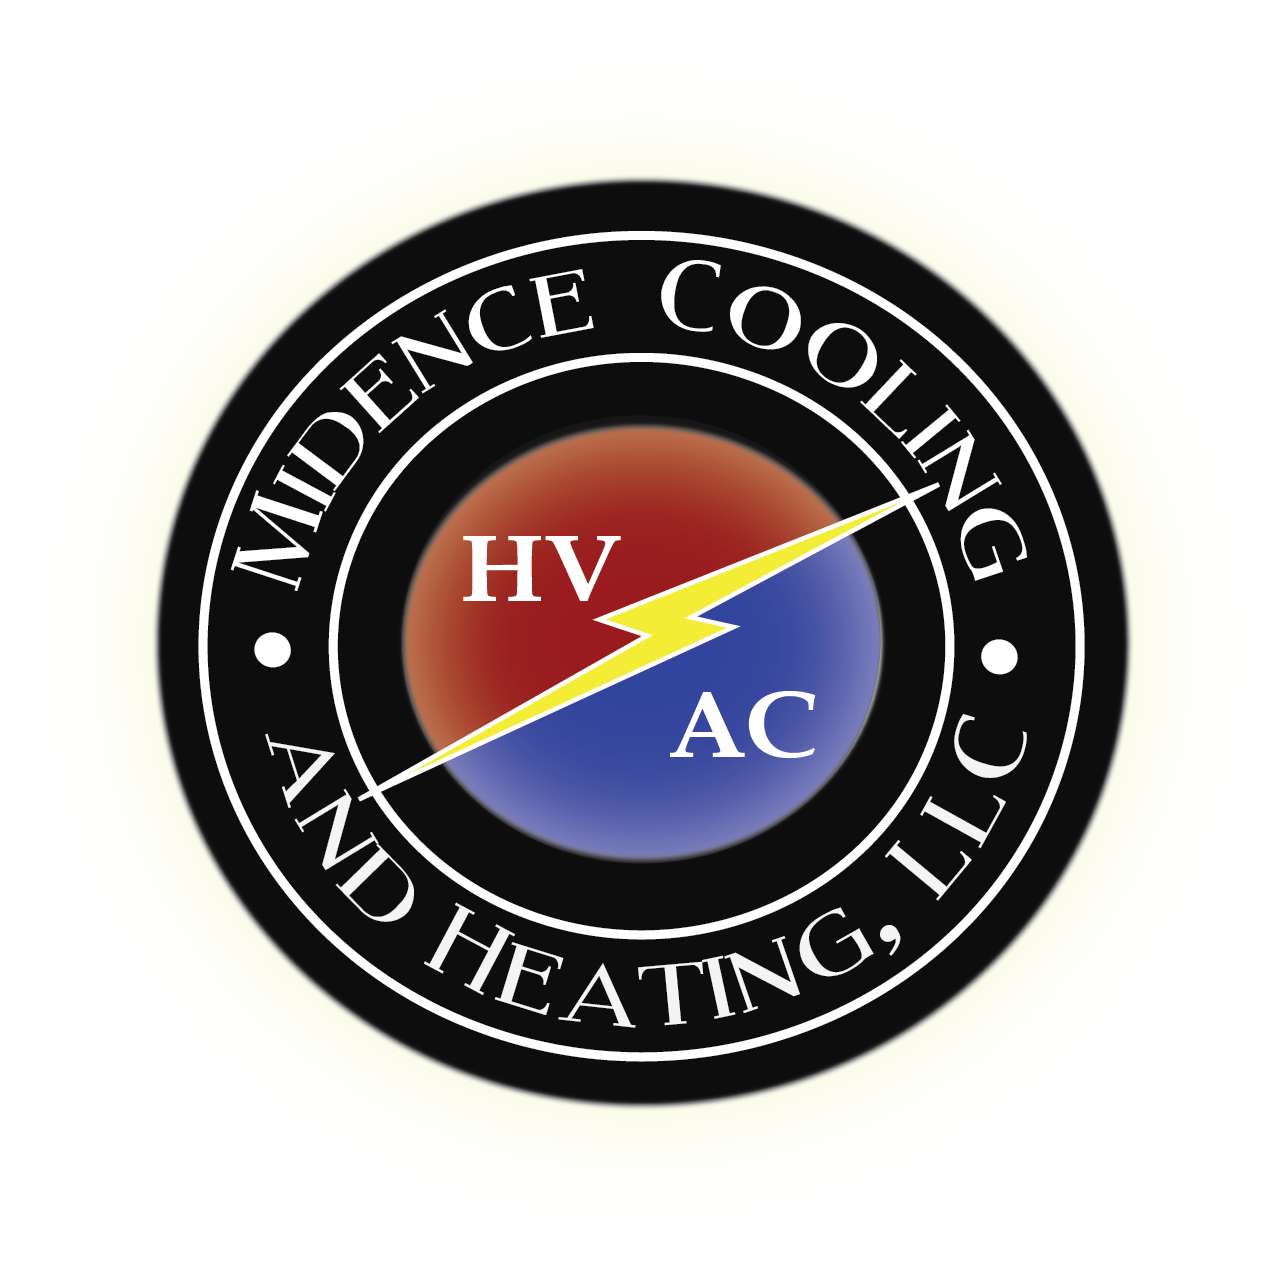 C & G Midence LLC, Cooling and Heating - Orlando, FL - (407)617-0211 | ShowMeLocal.com